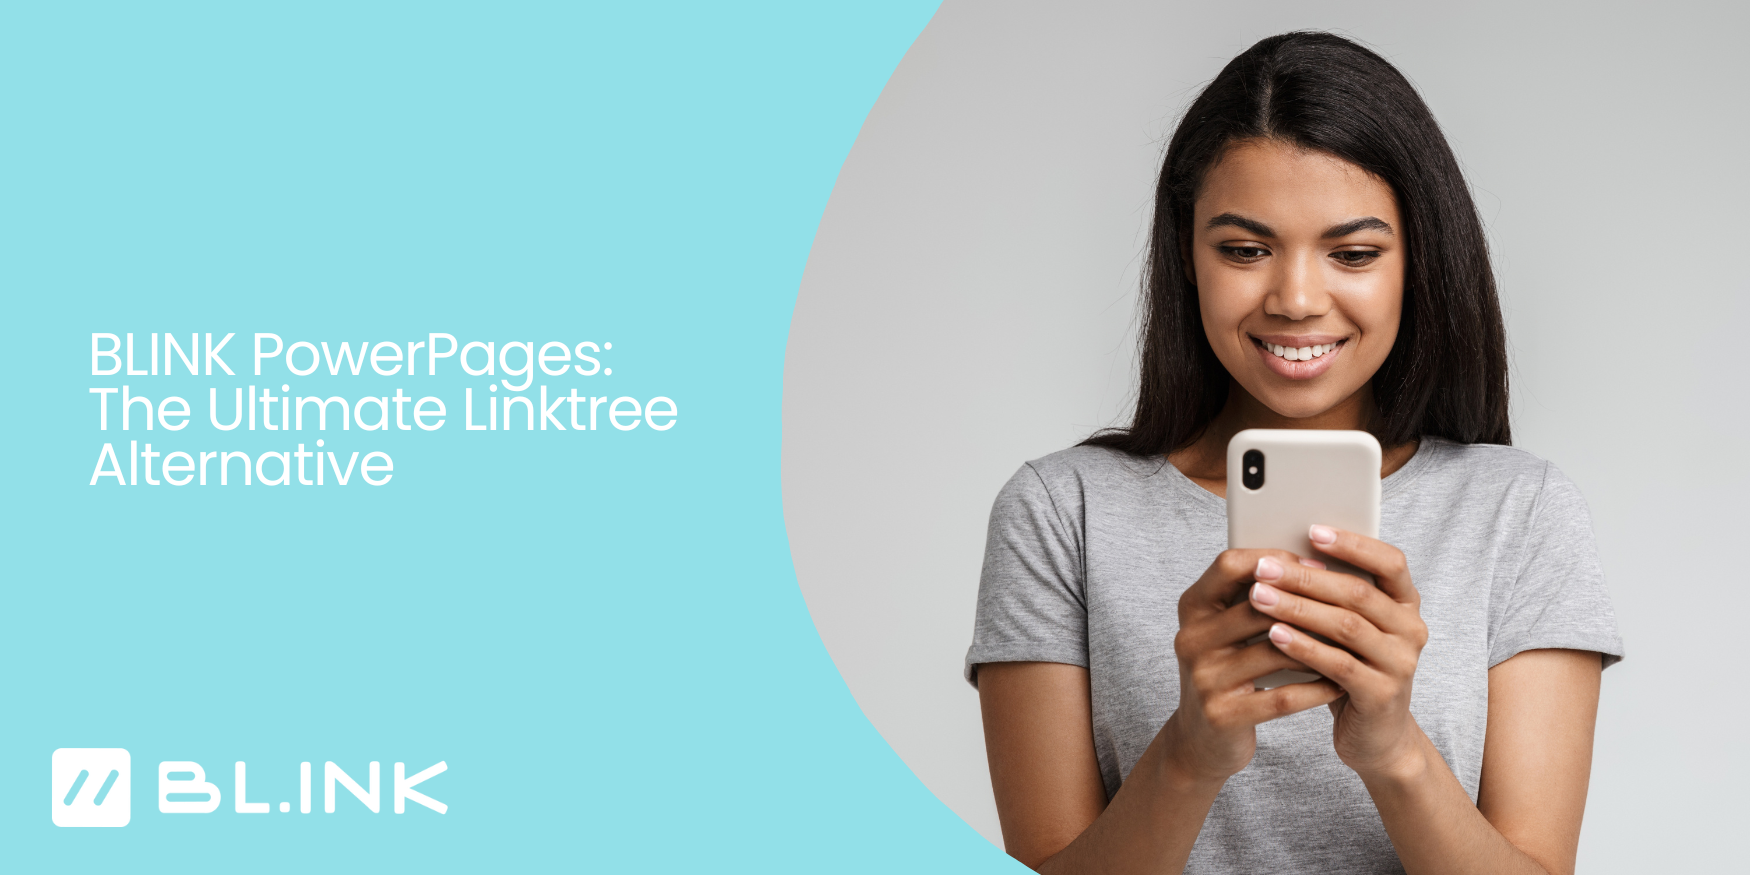 BLINK PowerPages are the Ultimate link in bio solution